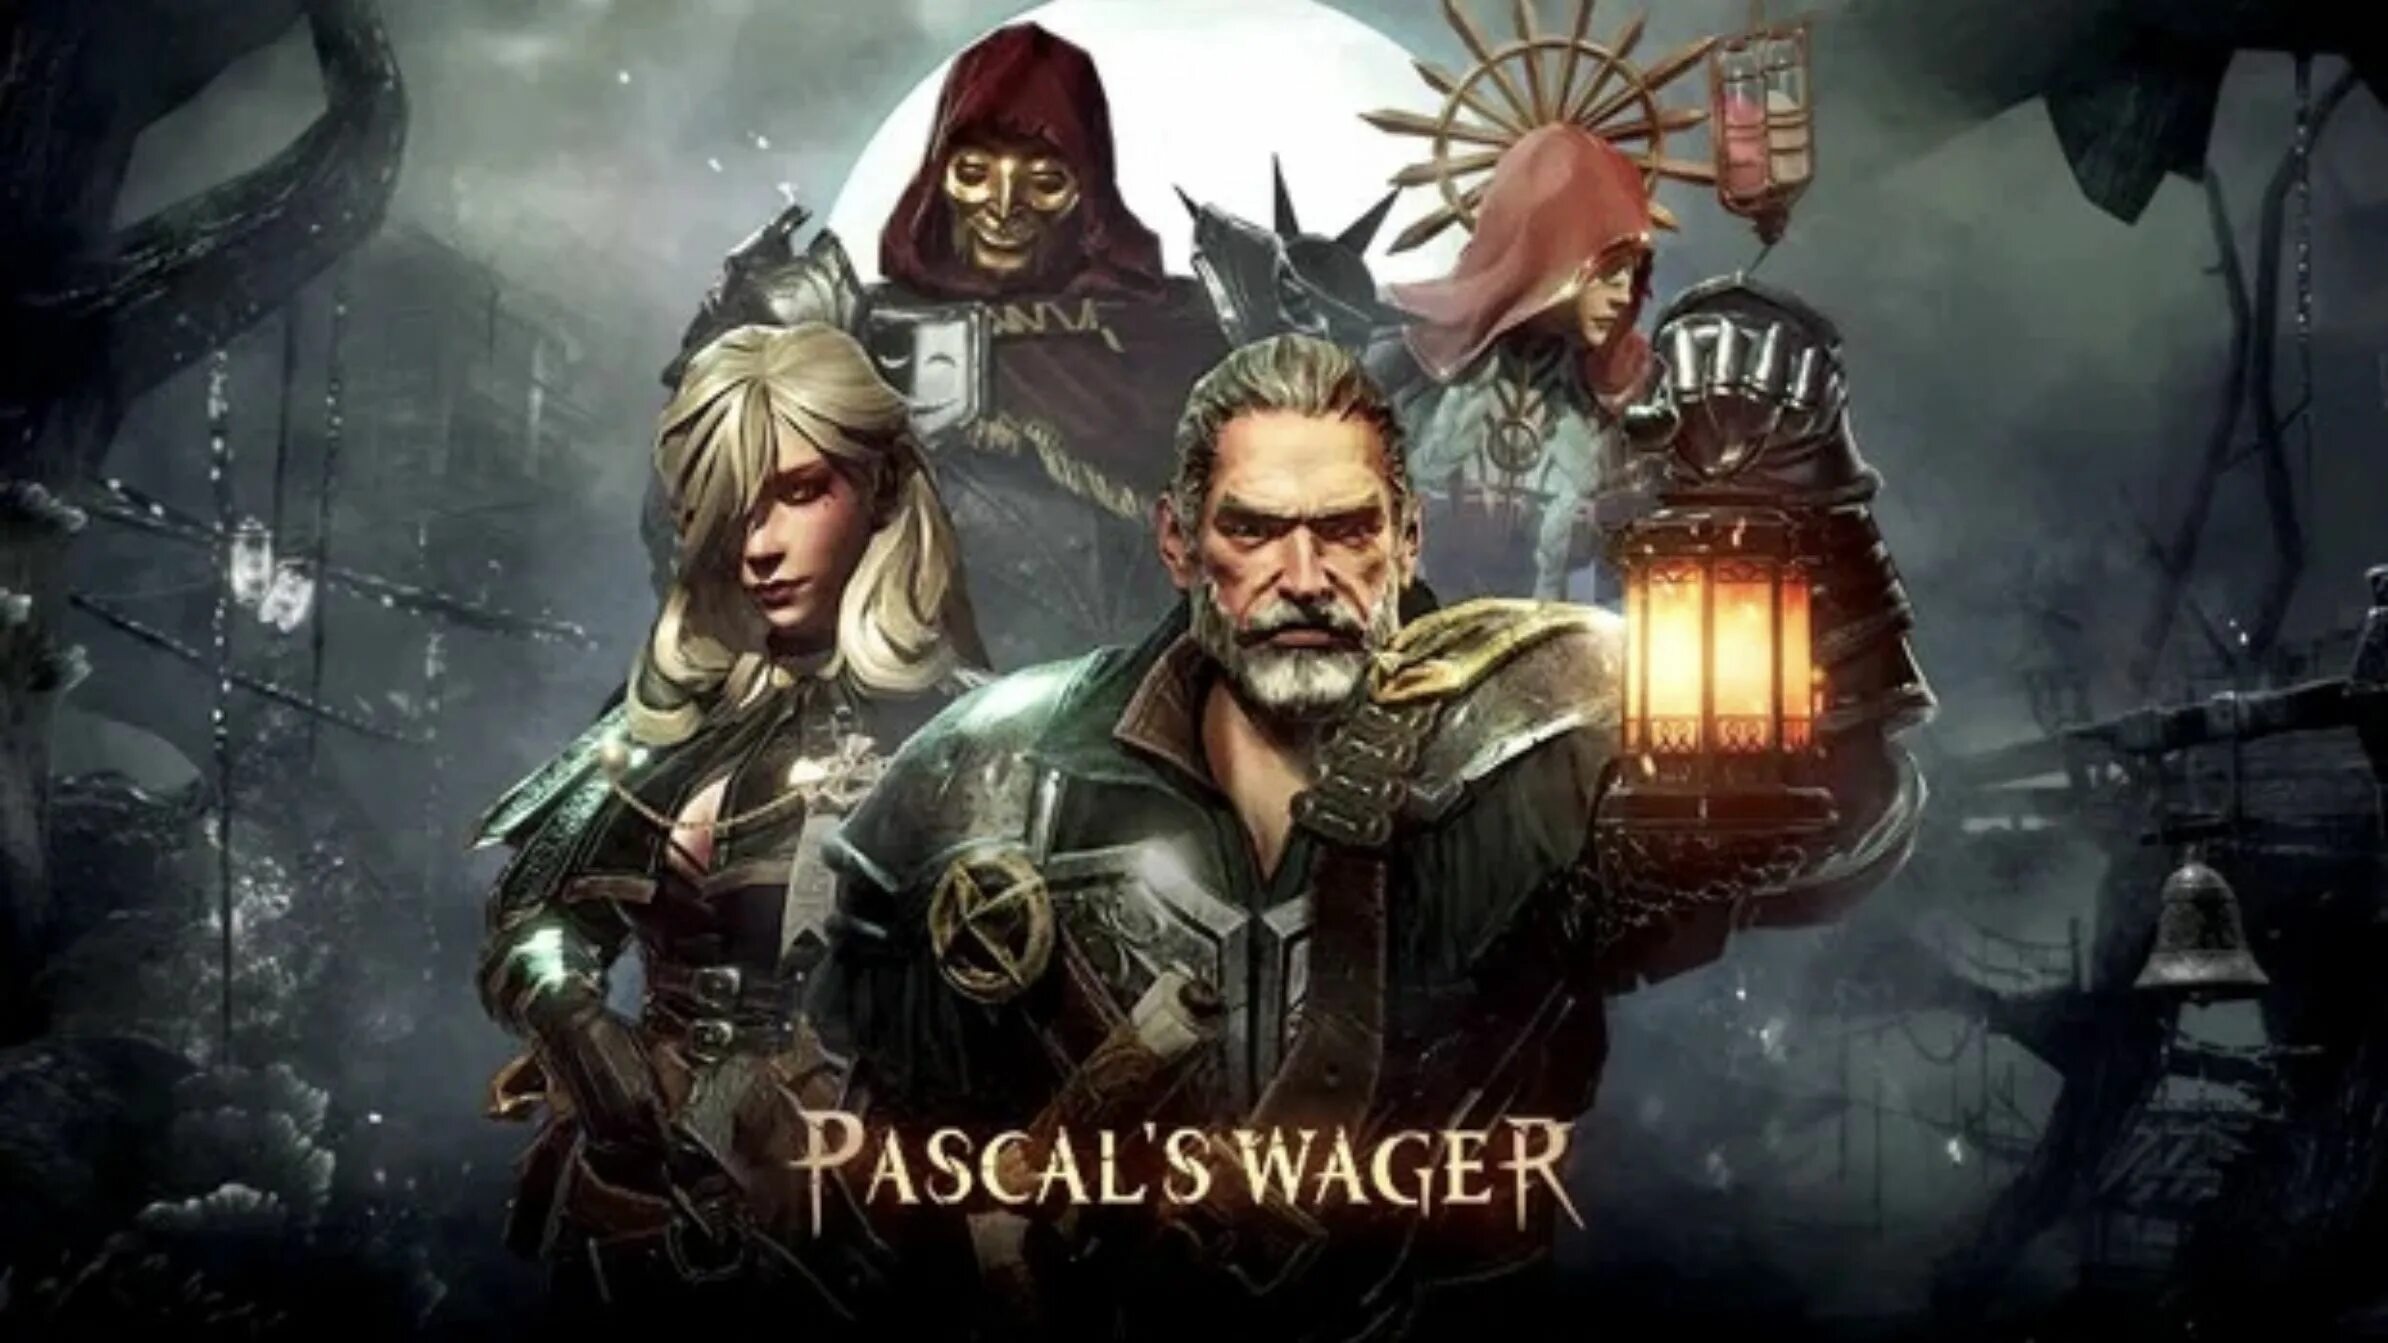 Pascal's Wager: Definitive Edition. Pascal Wager Android. Pascal's Wager на ПК. Pascal's Wager Definitive Edition Нинтендо. Pascal s wager на русском